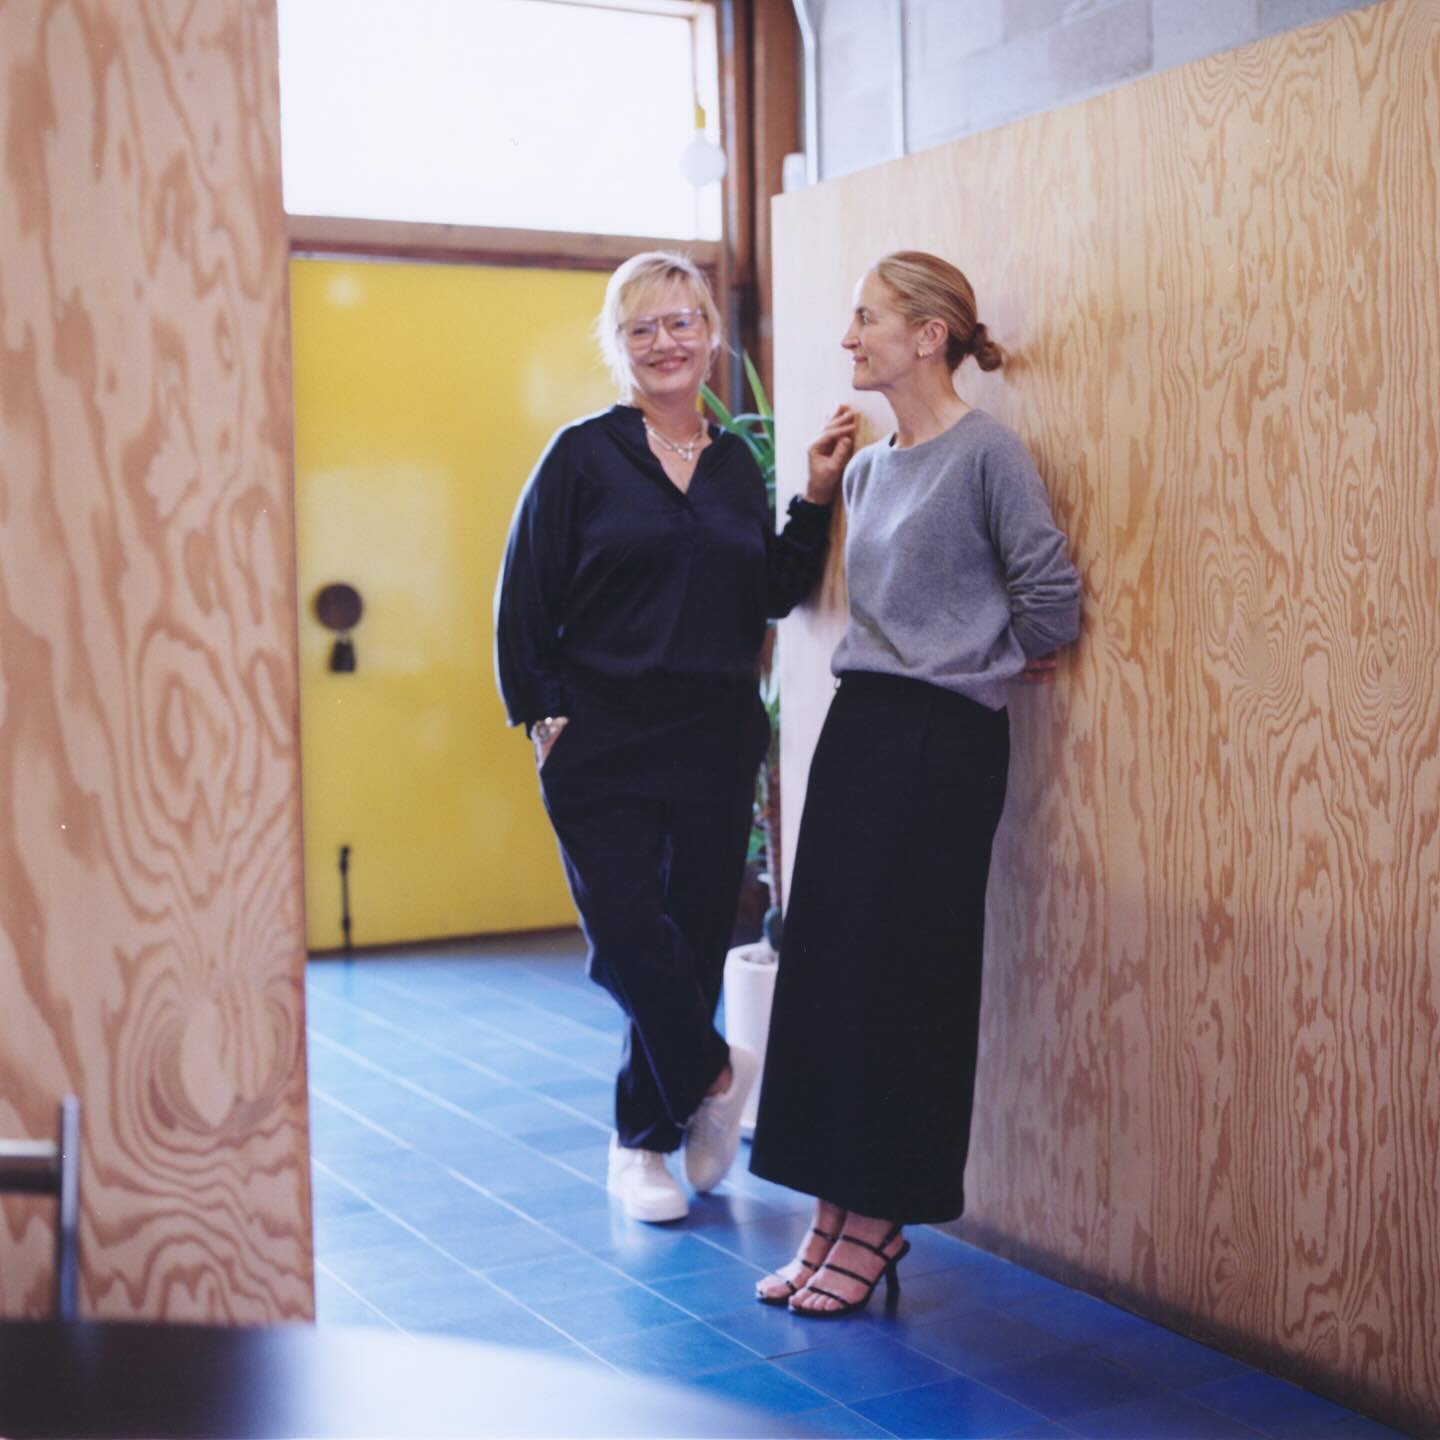 Thank you @cultured_mag for visiting the @bestorarchitecture offices and putting together this lovely dialogue with @barbarabestor &amp; Caroline Belhumeur of @vince 

On newsstands &amp; online